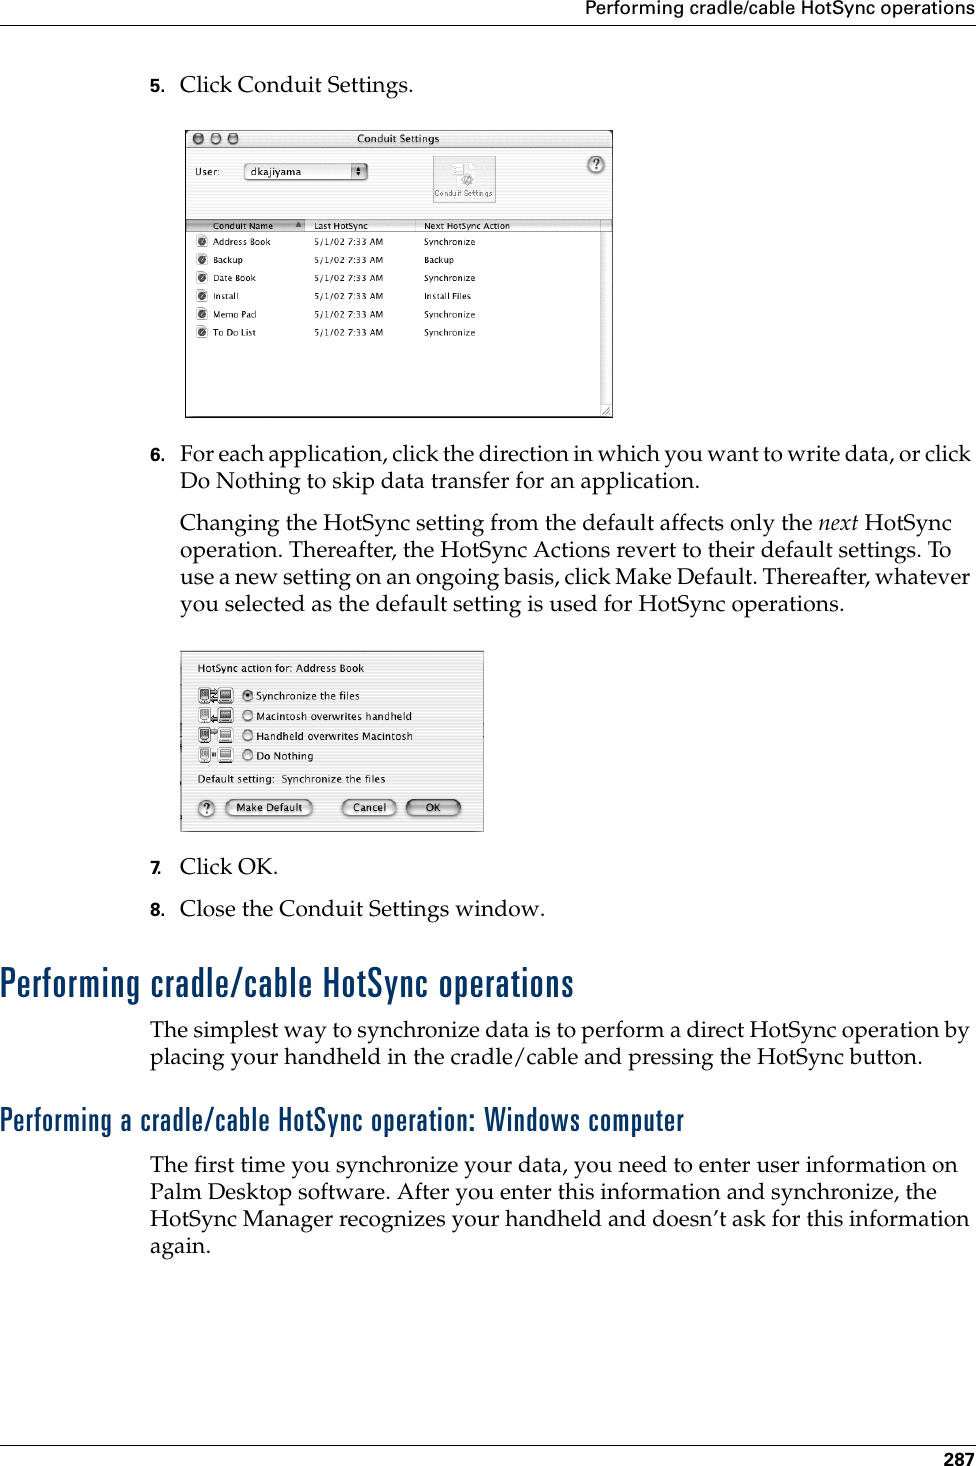 Performing cradle/cable HotSync operations2875. Click Conduit Settings.6. For each application, click the direction in which you want to write data, or click Do Nothing to skip data transfer for an application.Changing the HotSync setting from the default affects only the next HotSync operation. Thereafter, the HotSync Actions revert to their default settings. To use a new setting on an ongoing basis, click Make Default. Thereafter, whatever you selected as the default setting is used for HotSync operations.7. Click OK.8. Close the Conduit Settings window.Performing cradle/cable HotSync operationsThe simplest way to synchronize data is to perform a direct HotSync operation by placing your handheld in the cradle/cable and pressing the HotSync button.Performing a cradle/cable HotSync operation: Windows computerThe first time you synchronize your data, you need to enter user information on Palm Desktop software. After you enter this information and synchronize, the HotSync Manager recognizes your handheld and doesn’t ask for this information again.Palm, Inc. Confidential